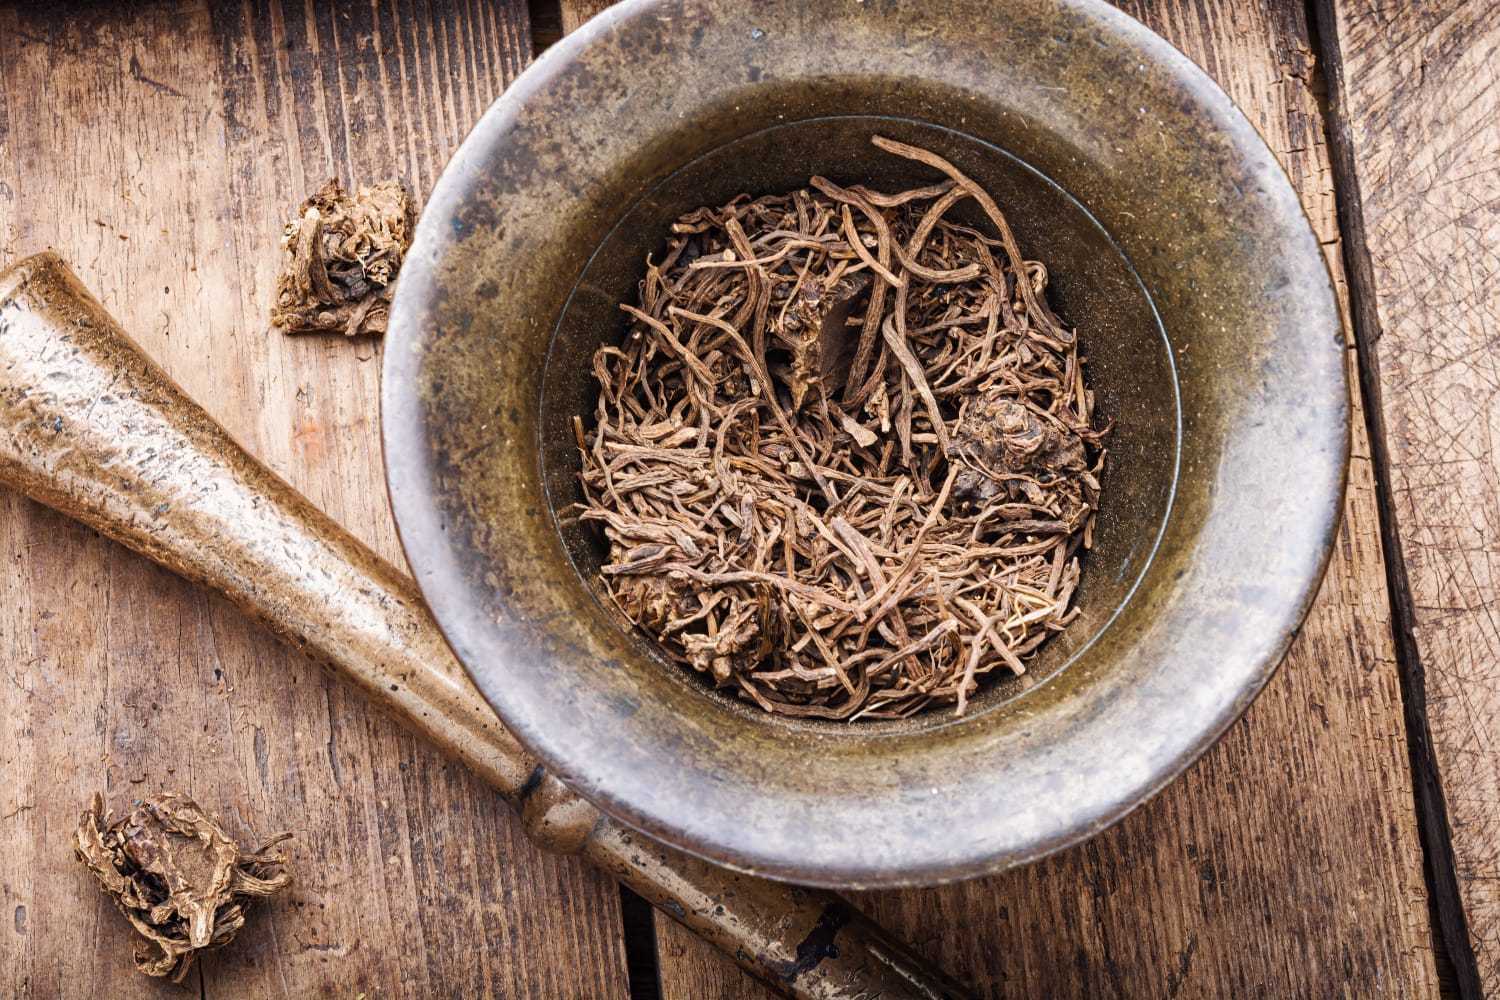 Valerian Root Benefits: A Natural Remedy for Better Sleep